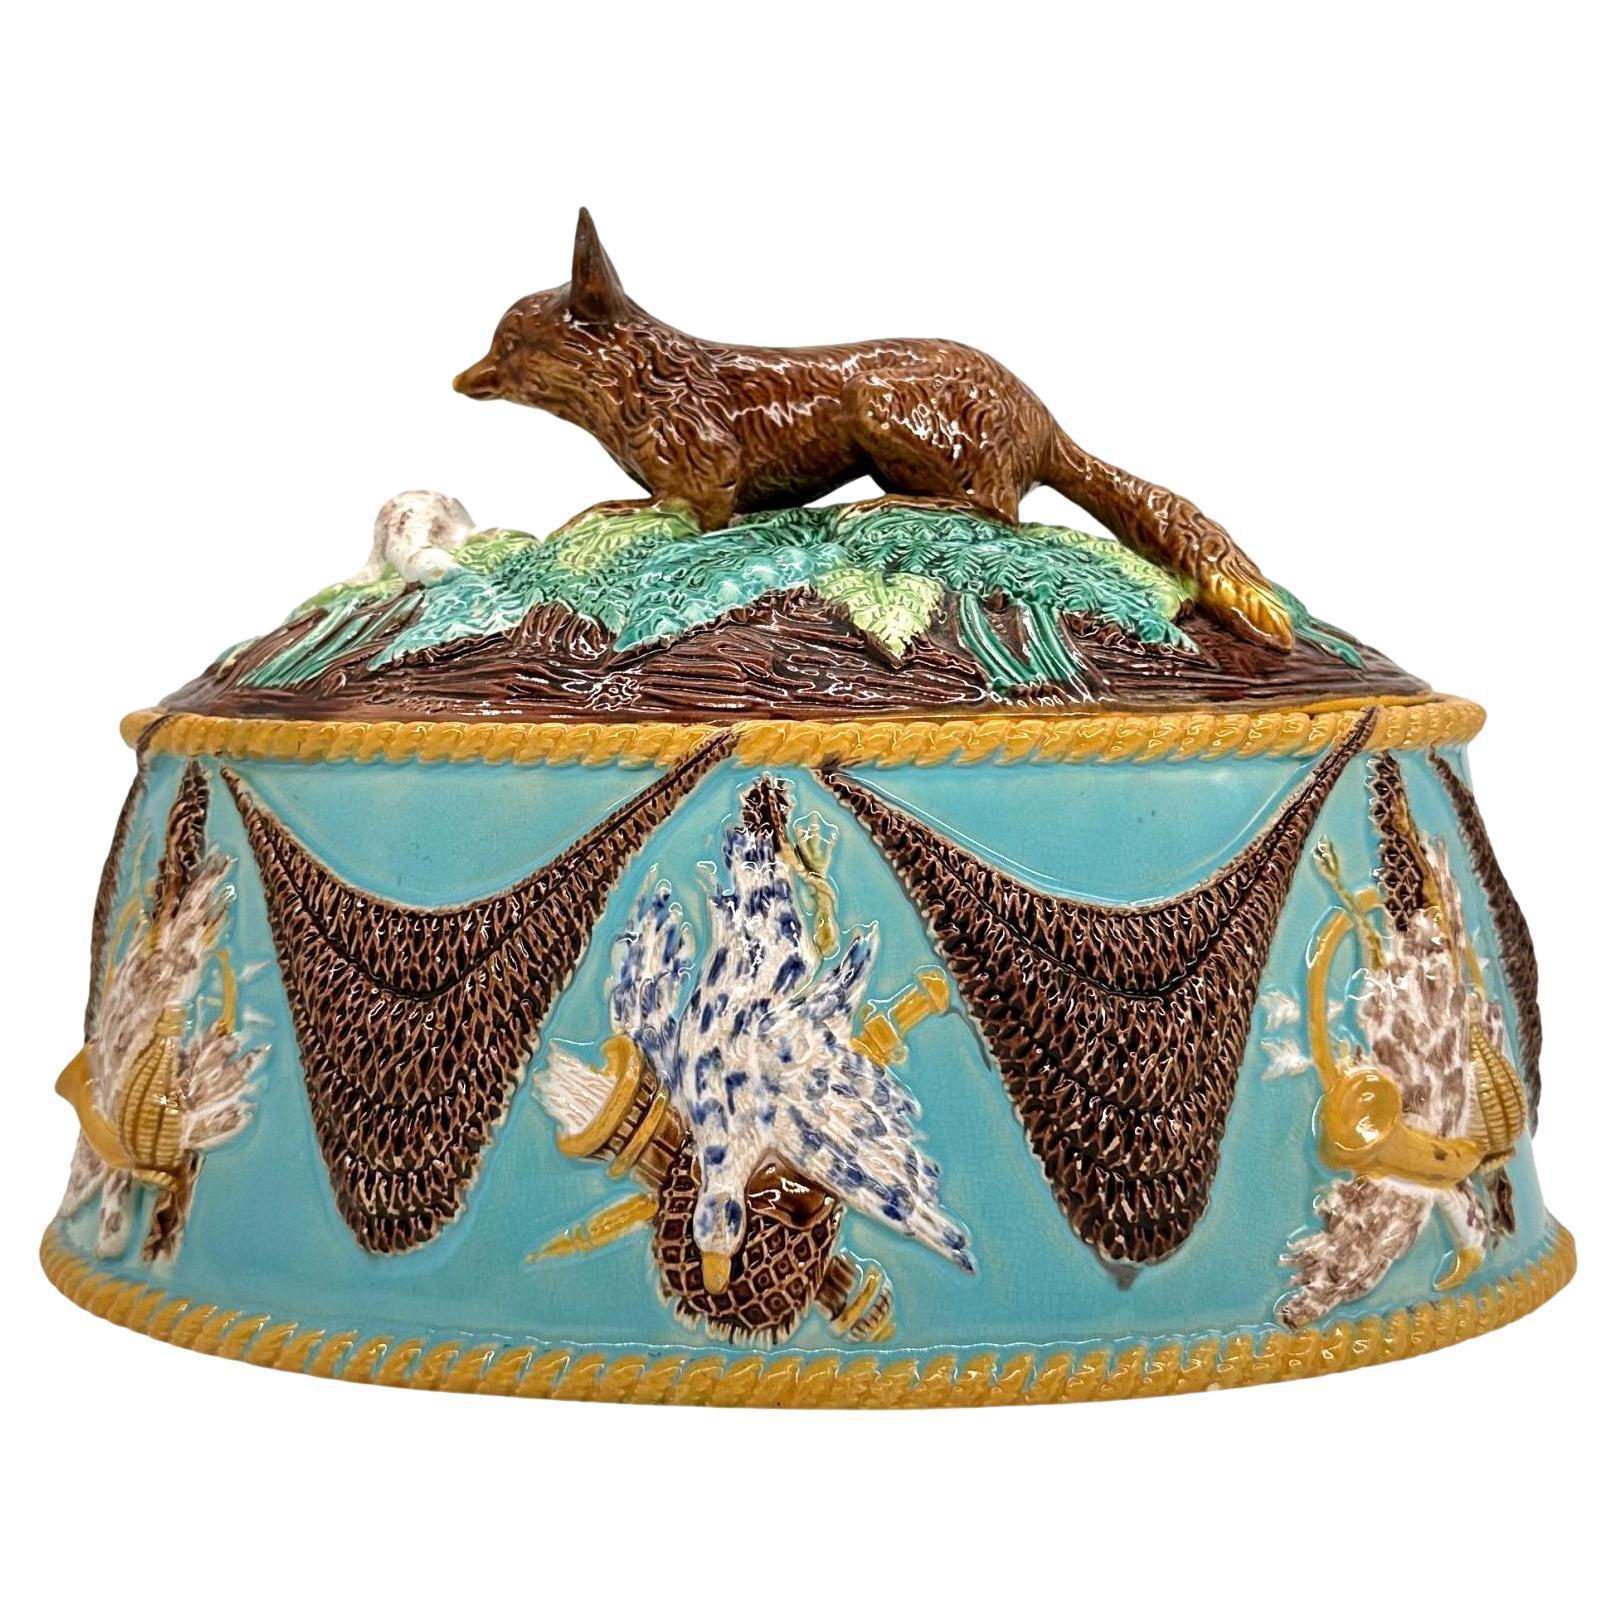 George Jones Majolica Game Tureen with Fox, Turquoise Ground, English, ca. 1870 For Sale